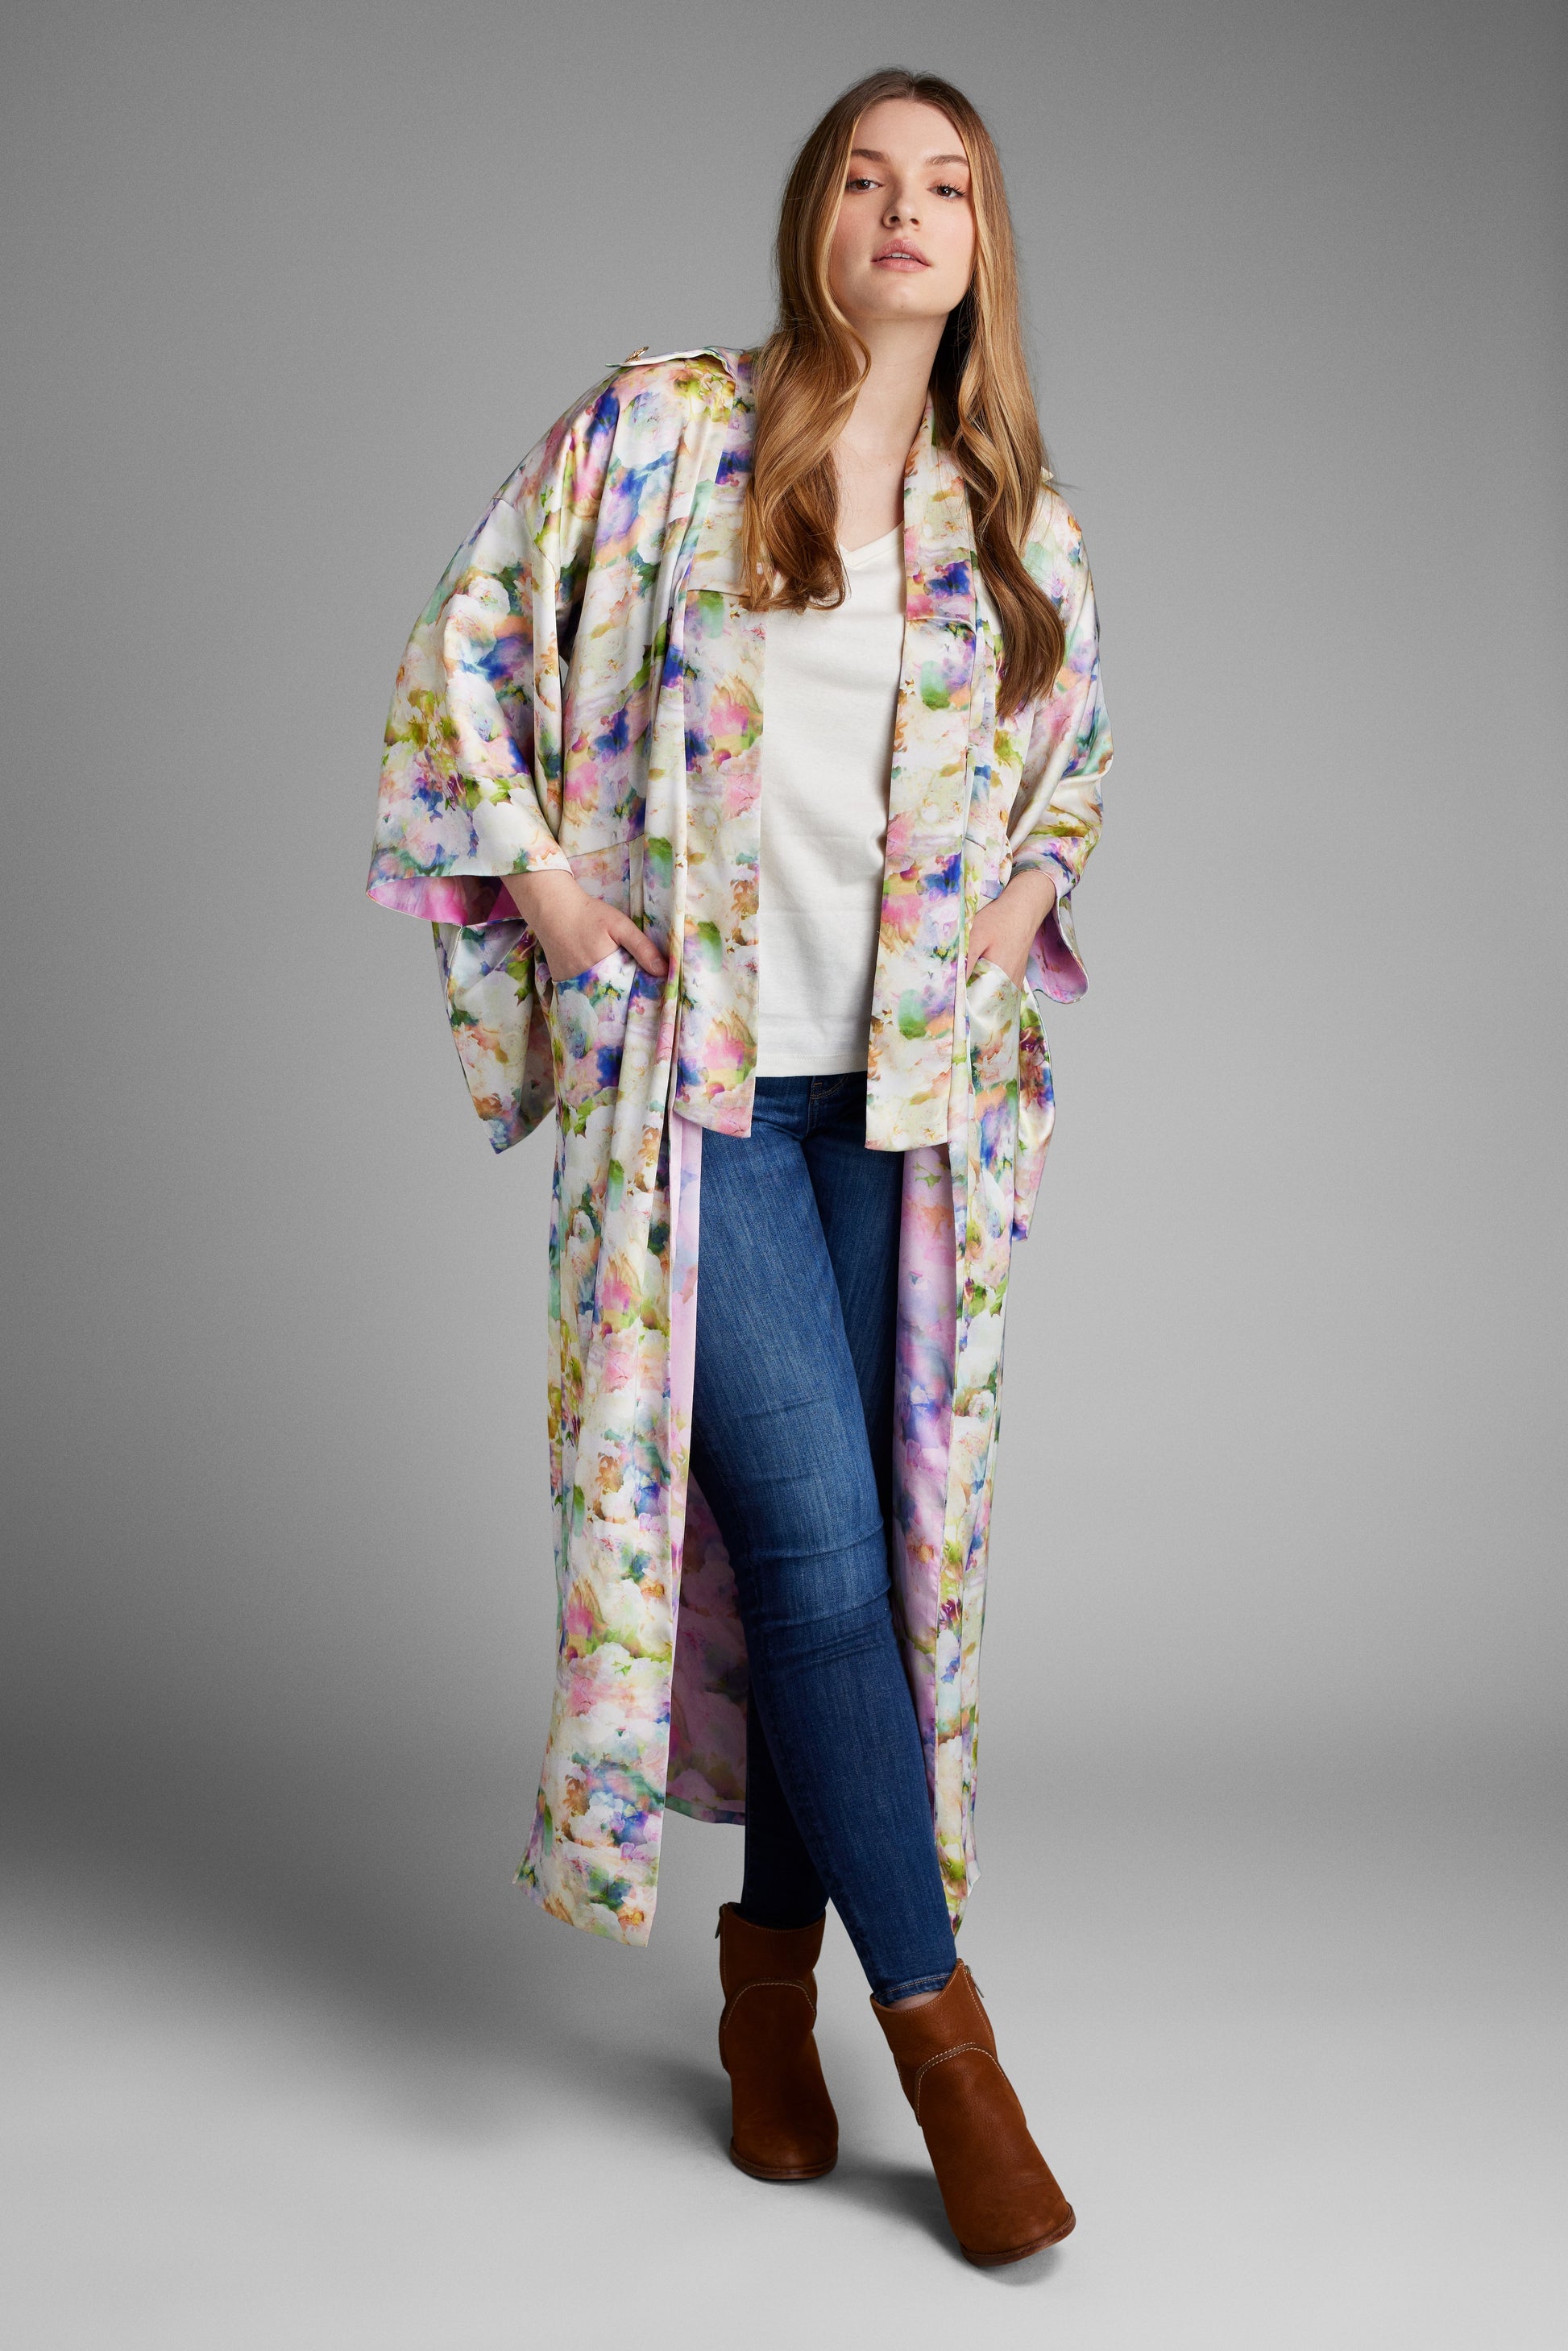 Front profile of woman wearing an all over floral printed kimono duster made from recycled textiles 5